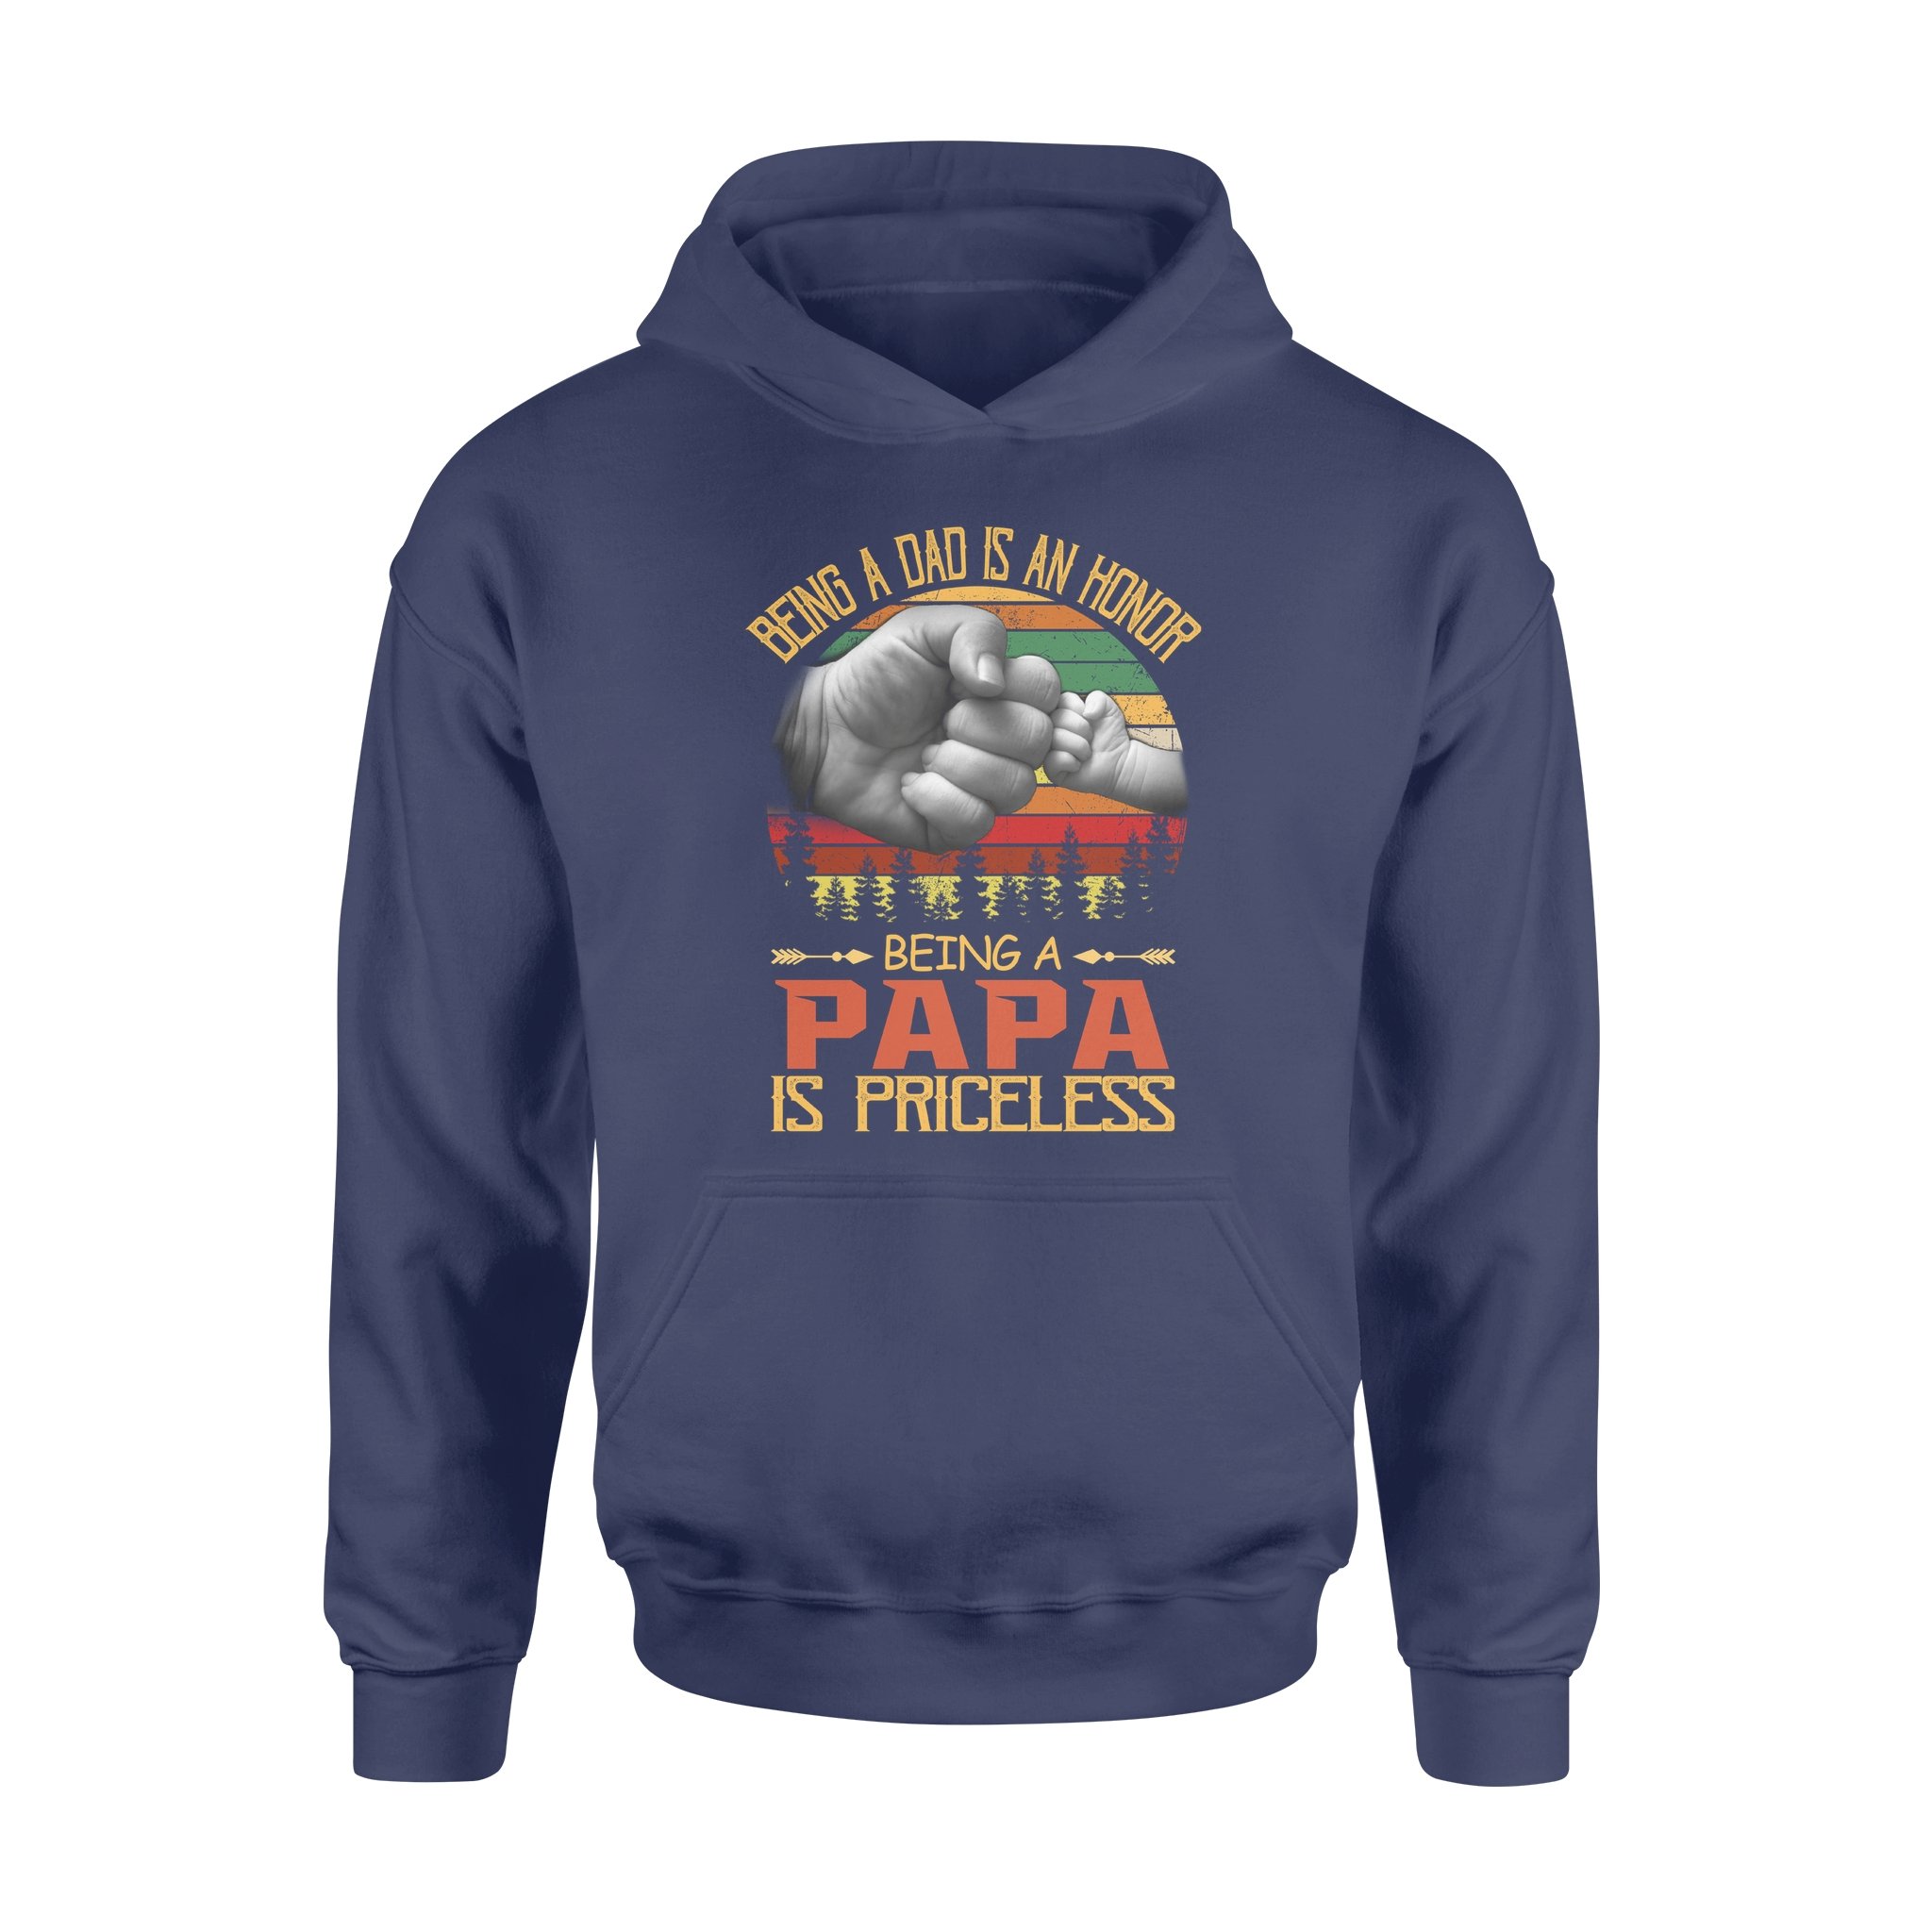 BEING A DAD IS AN HONOR BEING A PAPA IS PRICELESS , GIFTS FOR GRANDPA,GRANDPA SHIRT,GRANDPA GIFTS,FATHER?S DAY GIFT,PLUS SIZE SHIRT 1